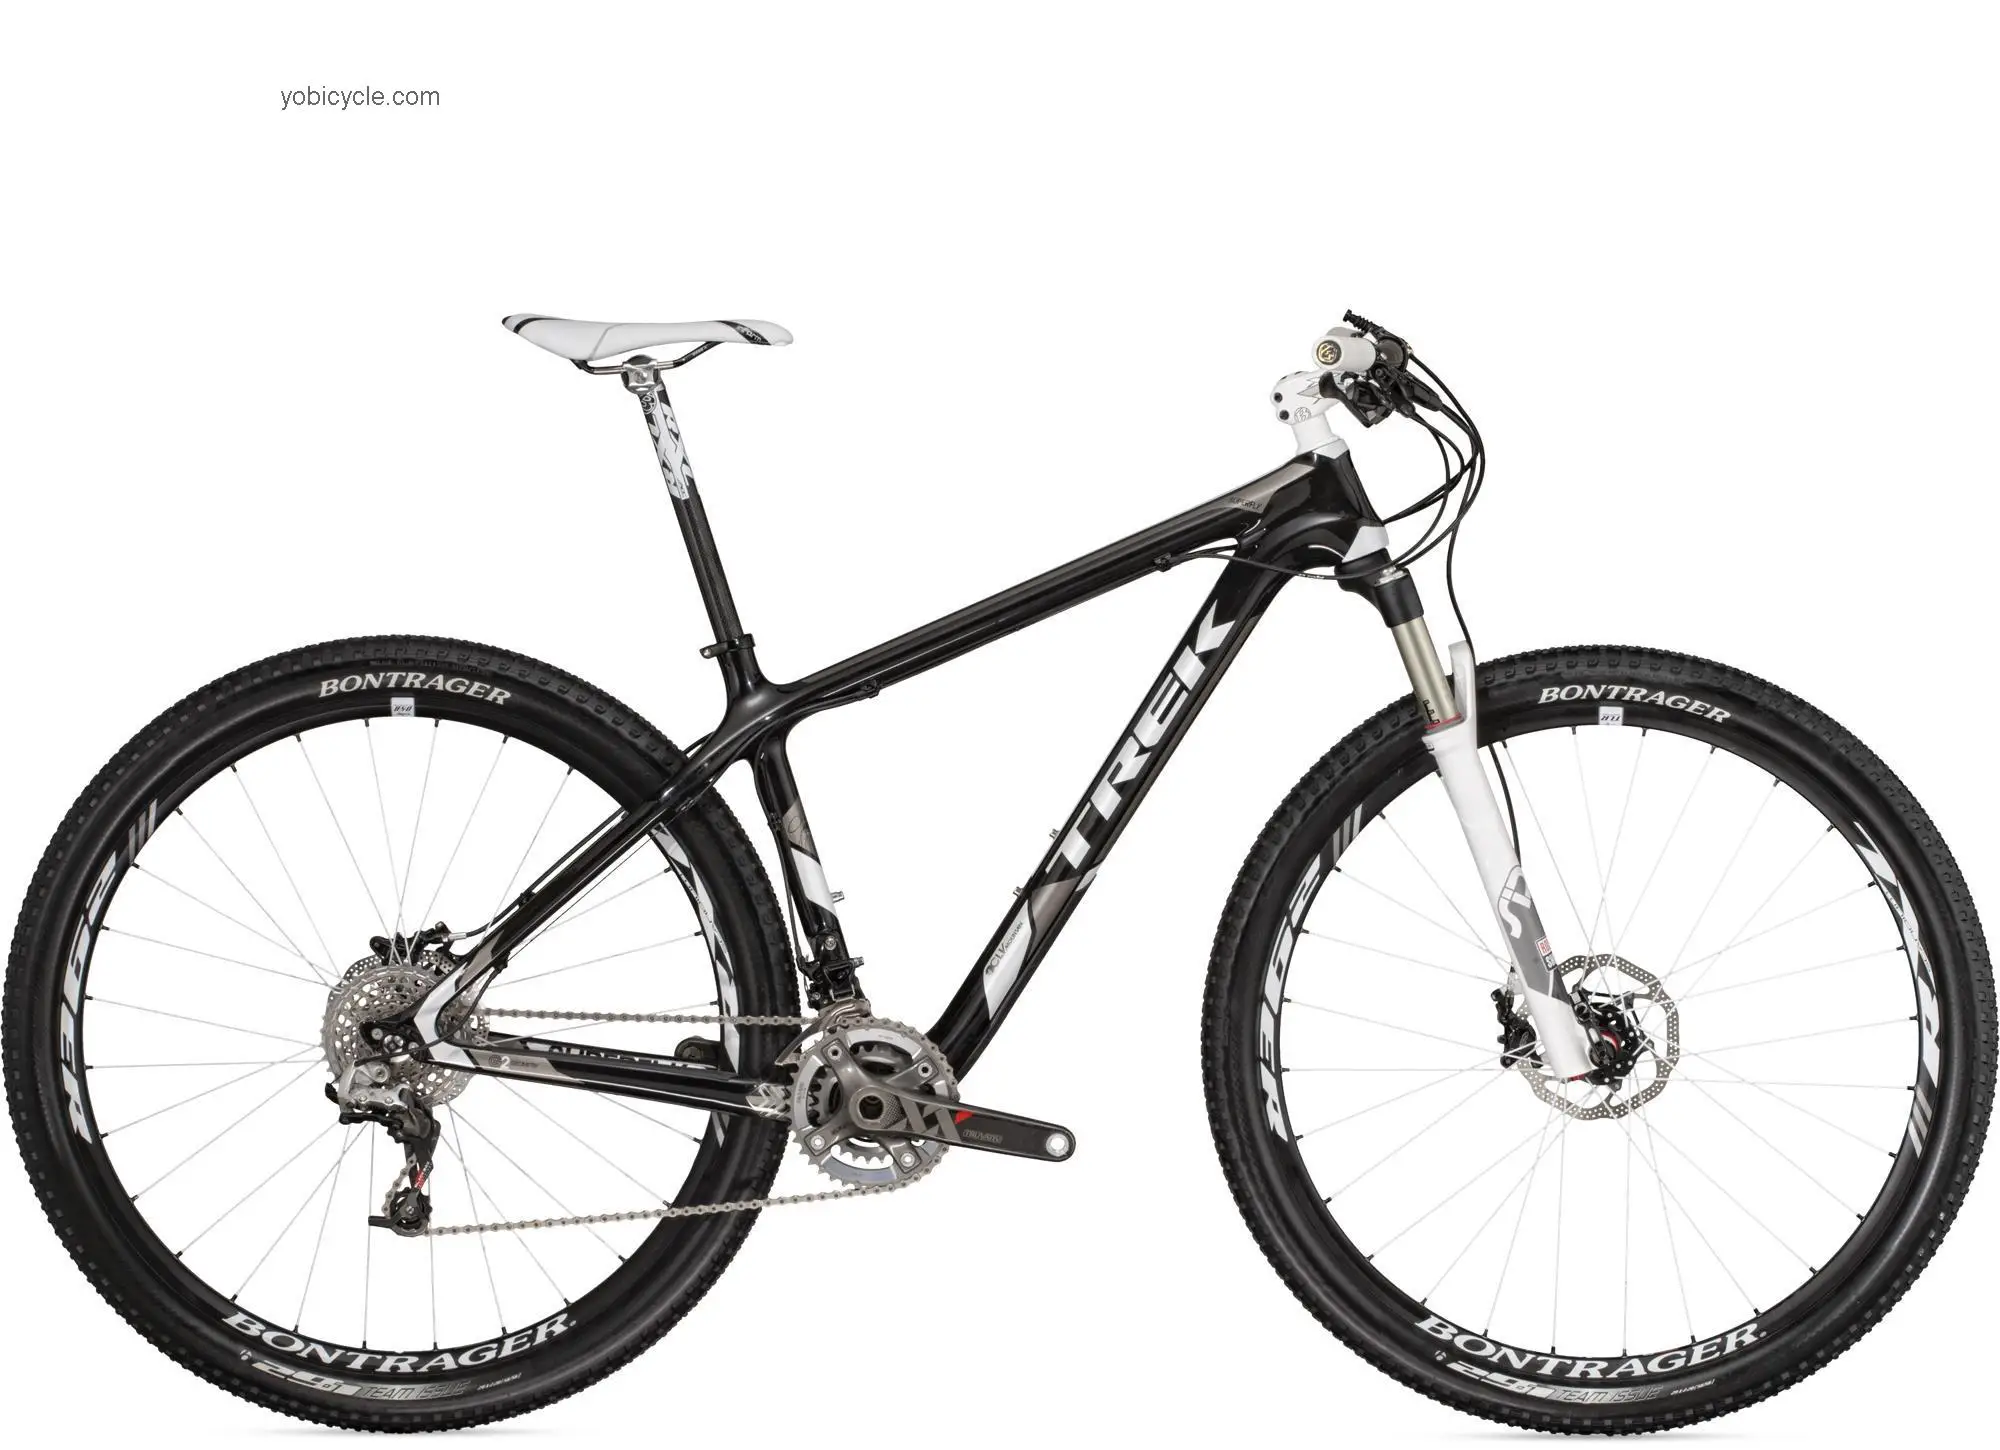 Trek Superfly Pro 2012 comparison online with competitors